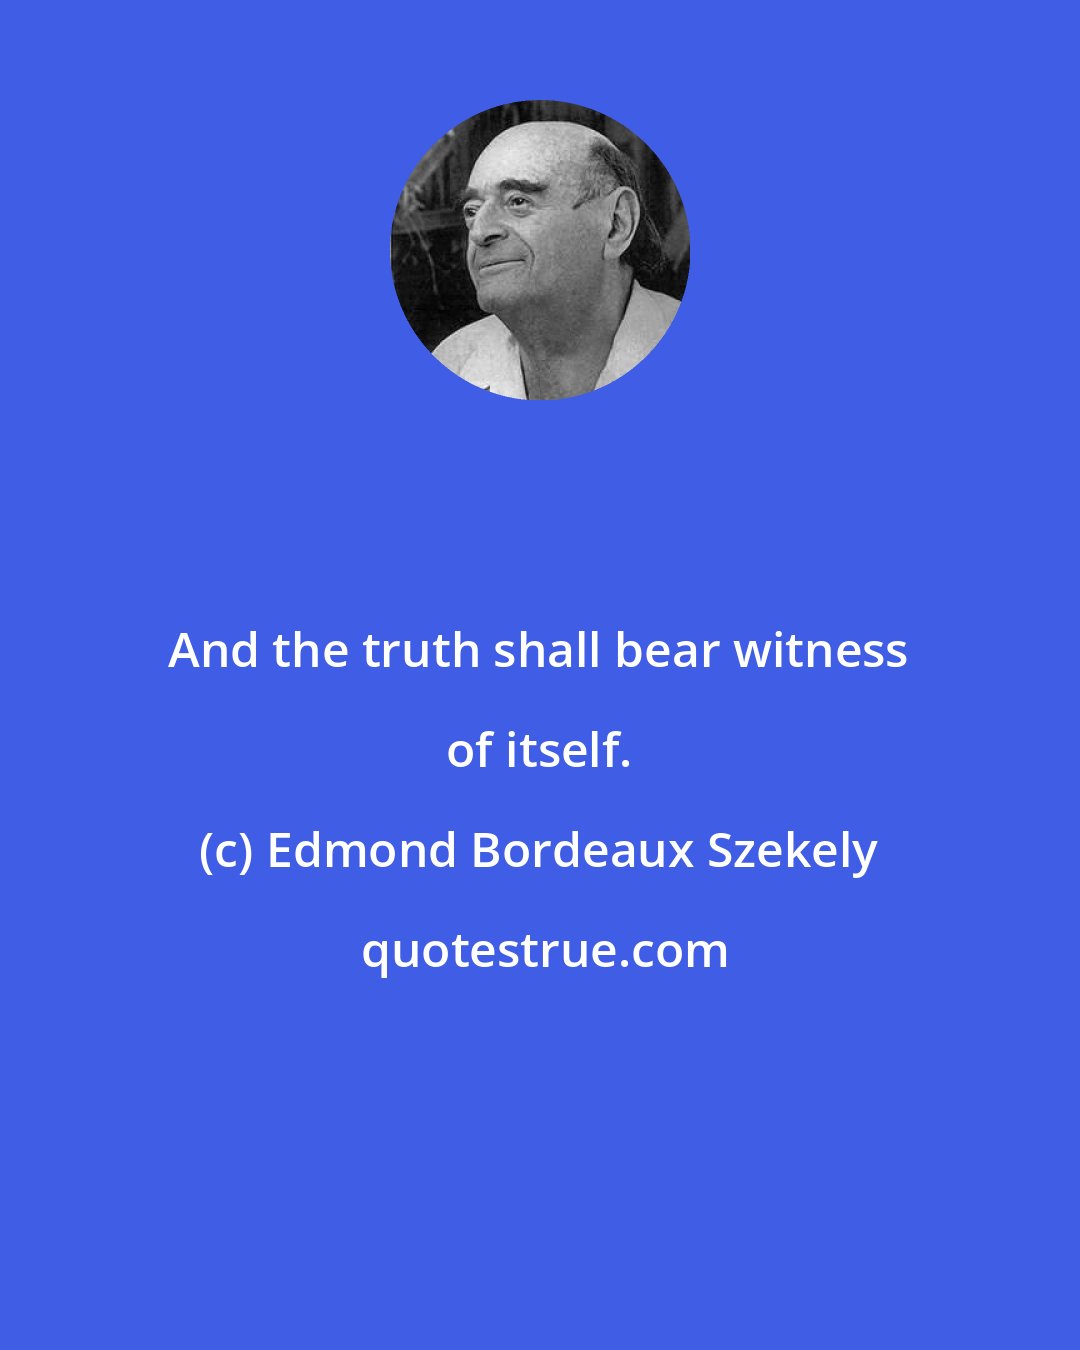 Edmond Bordeaux Szekely: And the truth shall bear witness of itself.